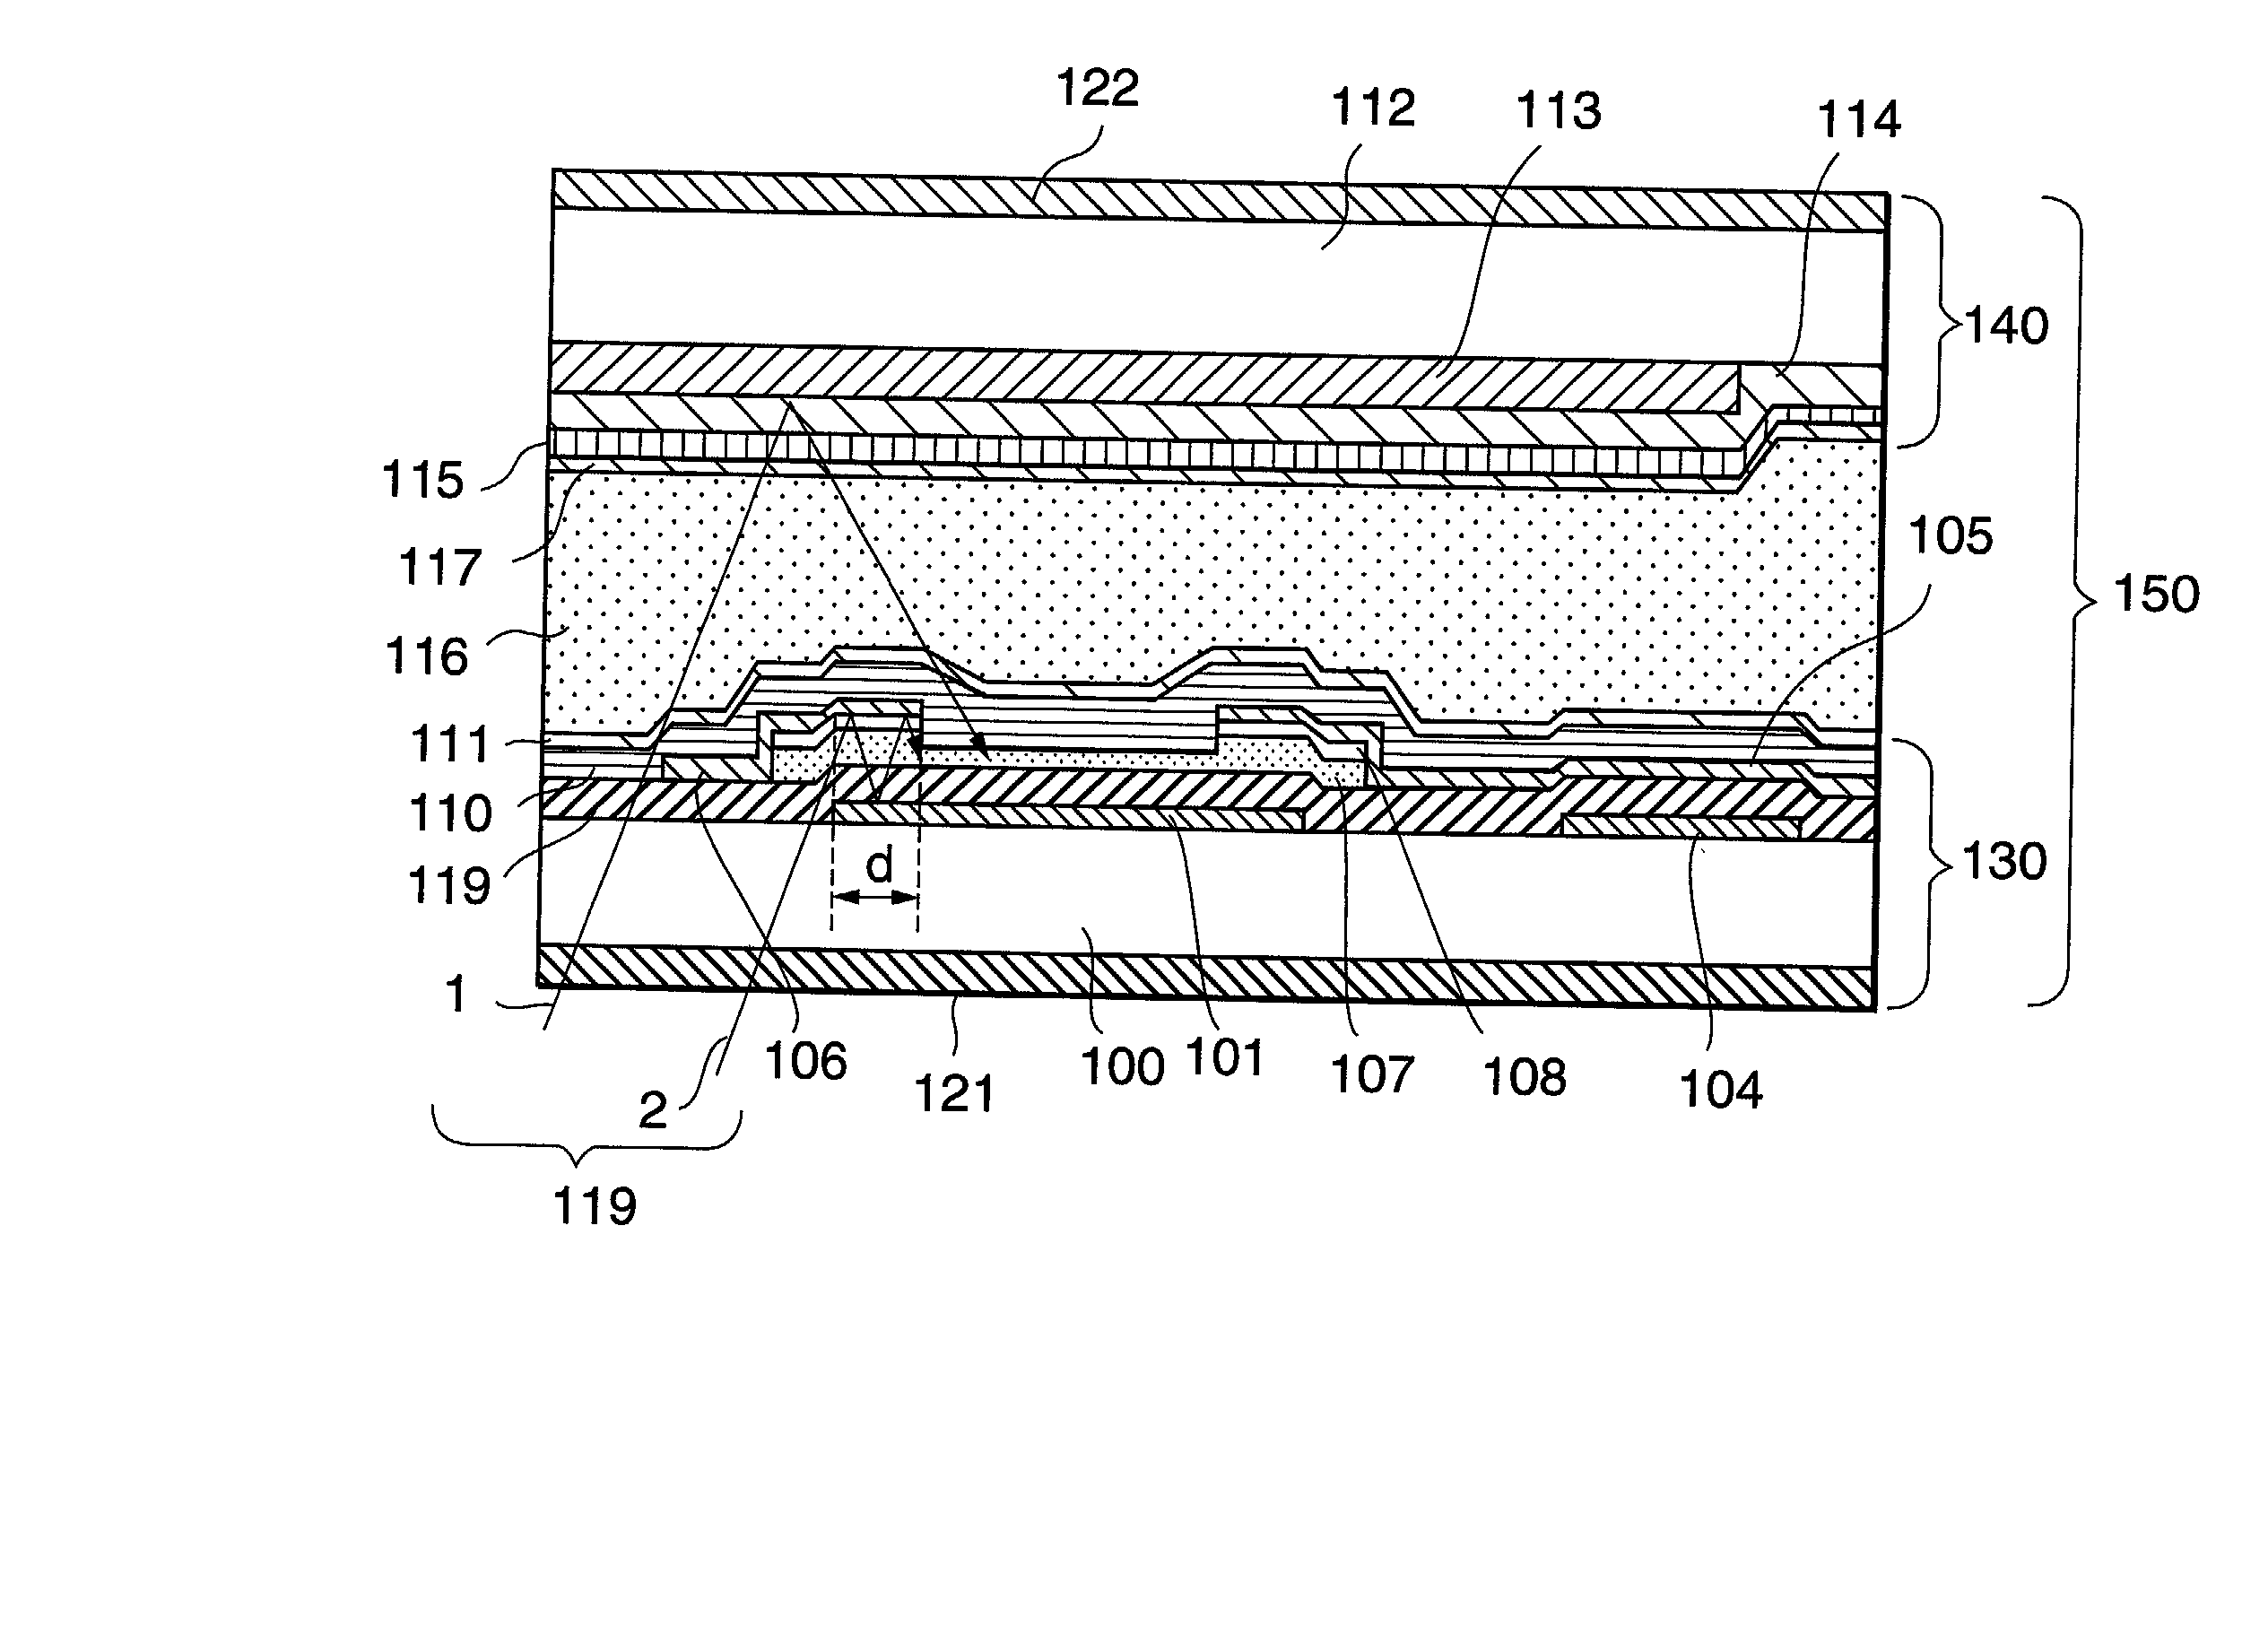 Active matrix liquid crystal display device and switching element used therein